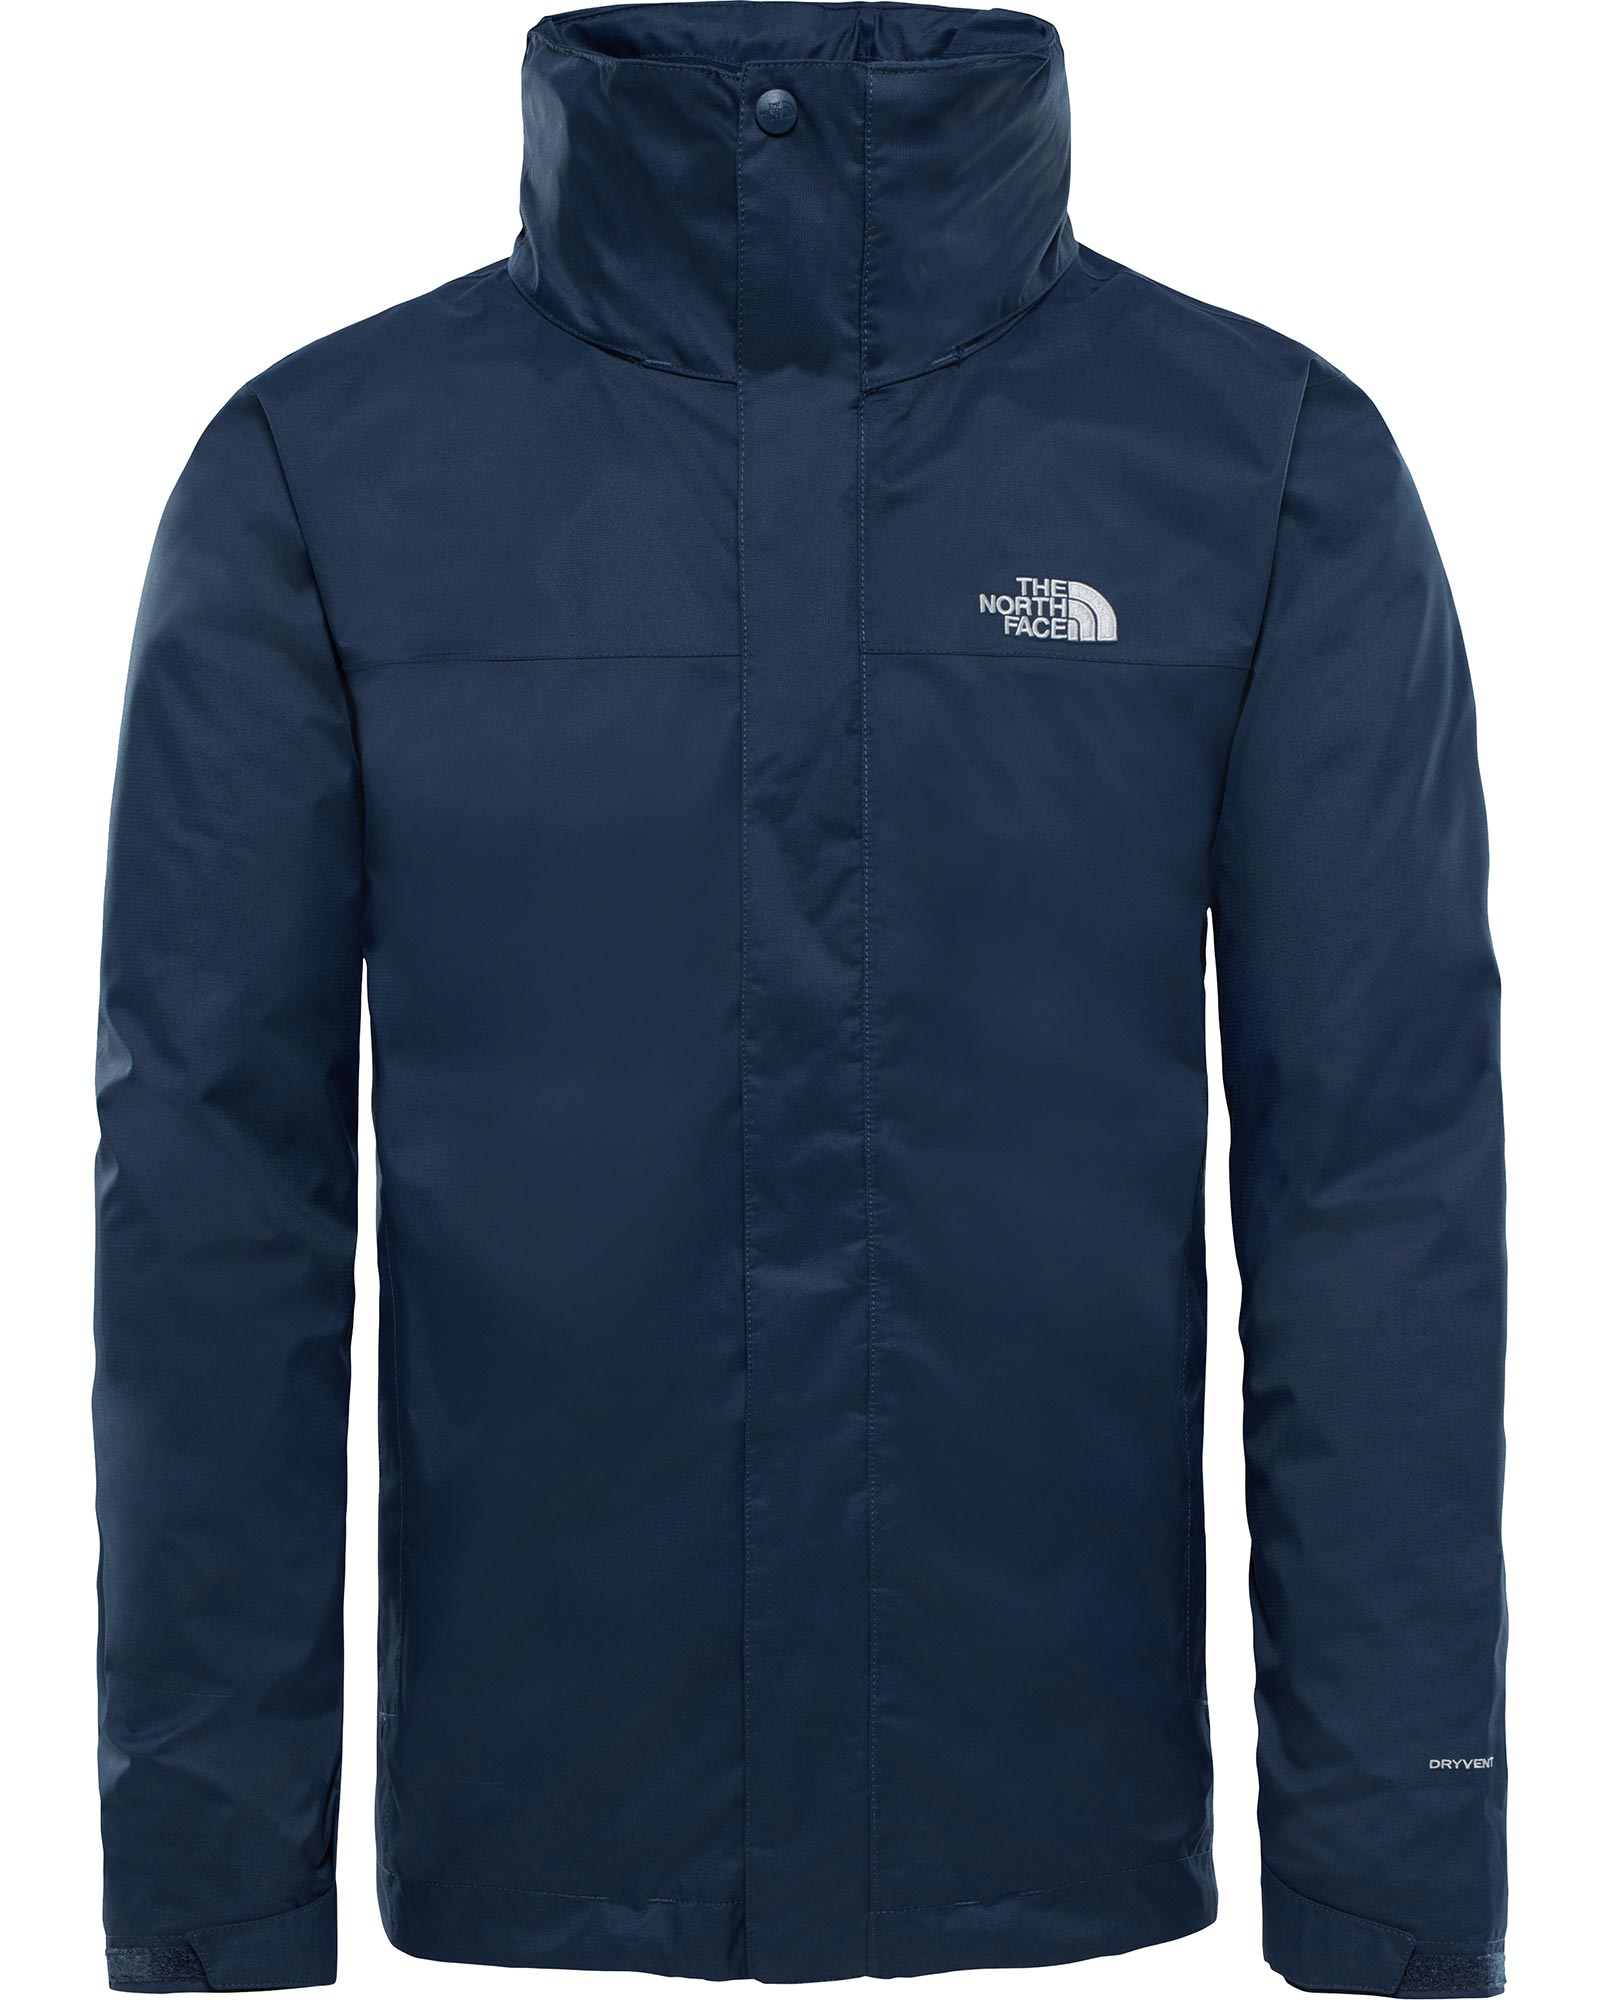 The North Face Evolve Triclimate Men’s Jacket - Urban Navy S